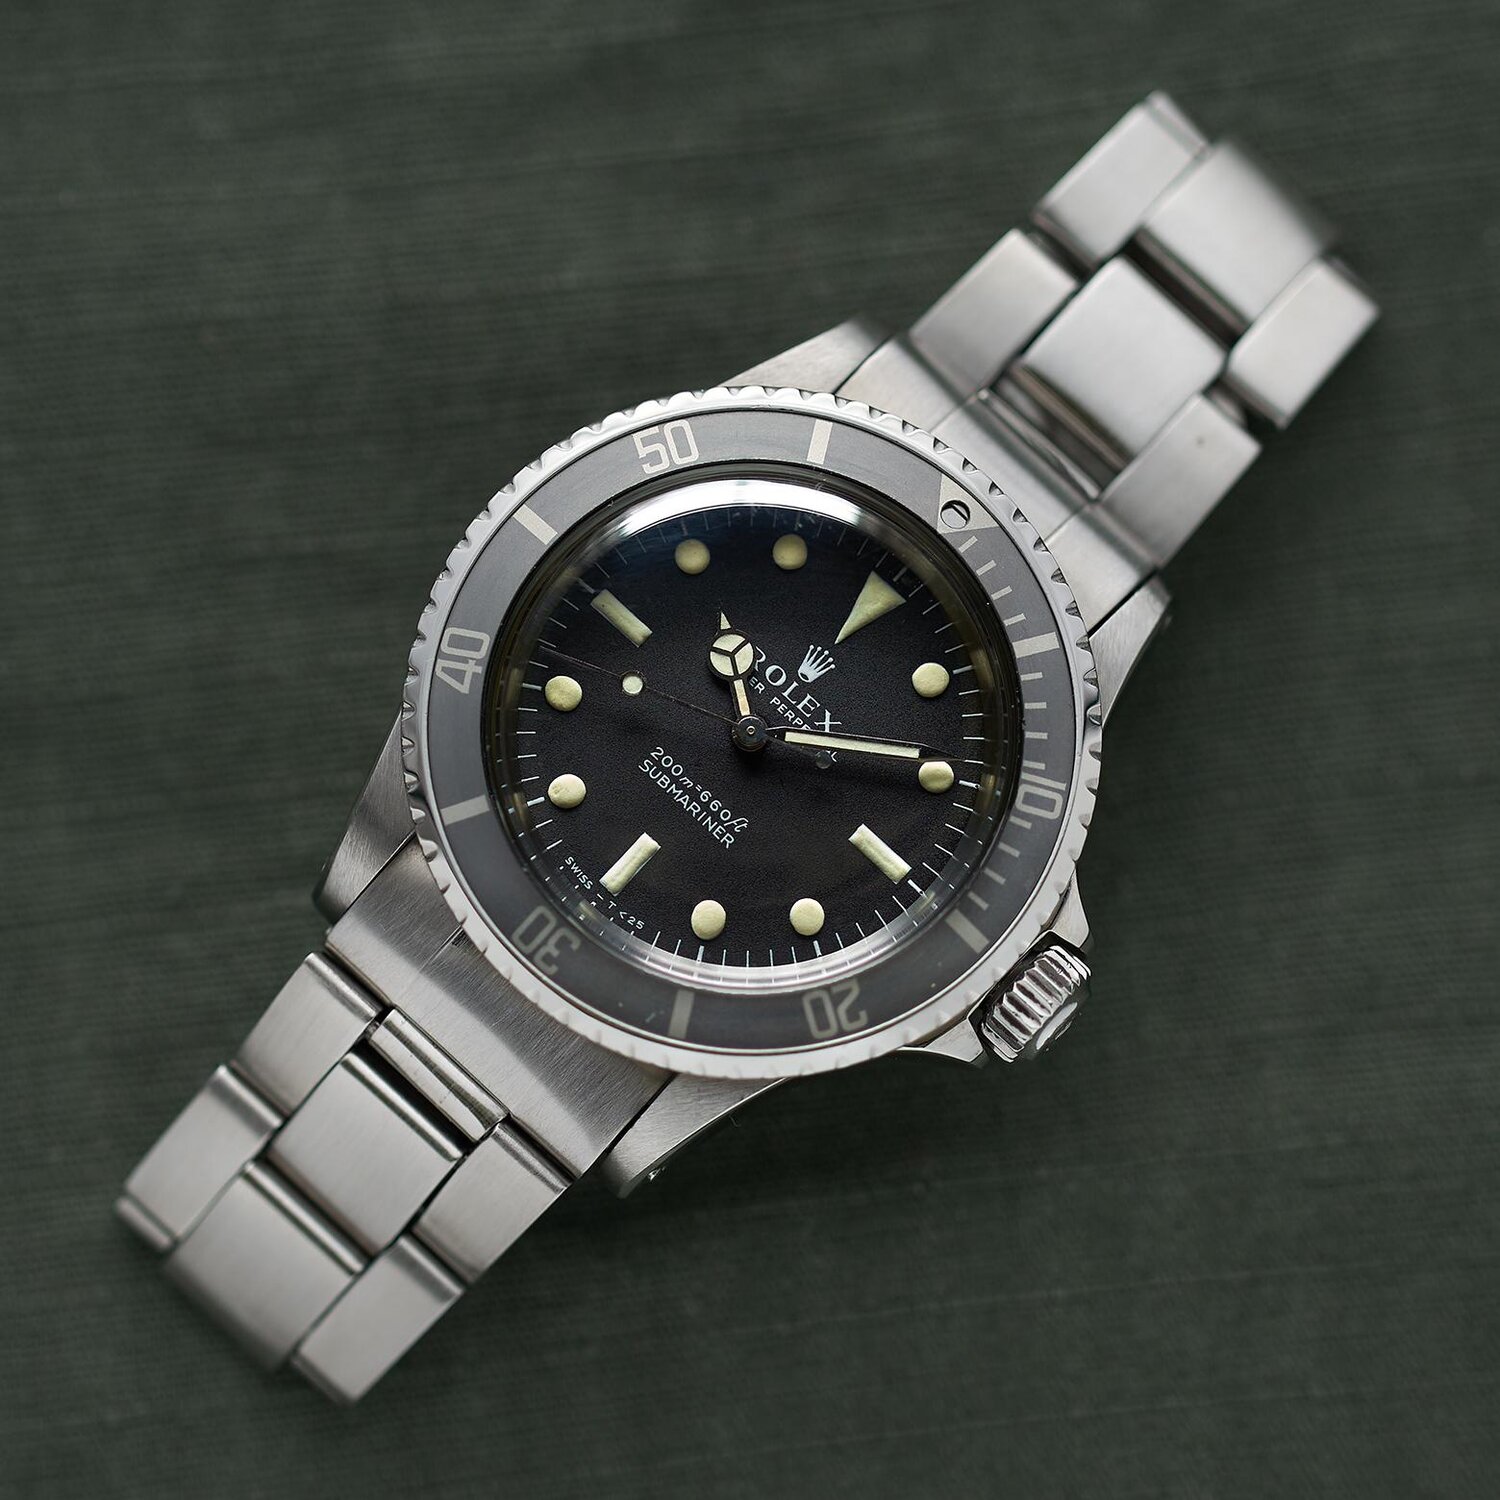 Ponašanje uvjeriti sud  Rolex Submariner: What to know before buying your first vintage Submariner  — Rescapement.